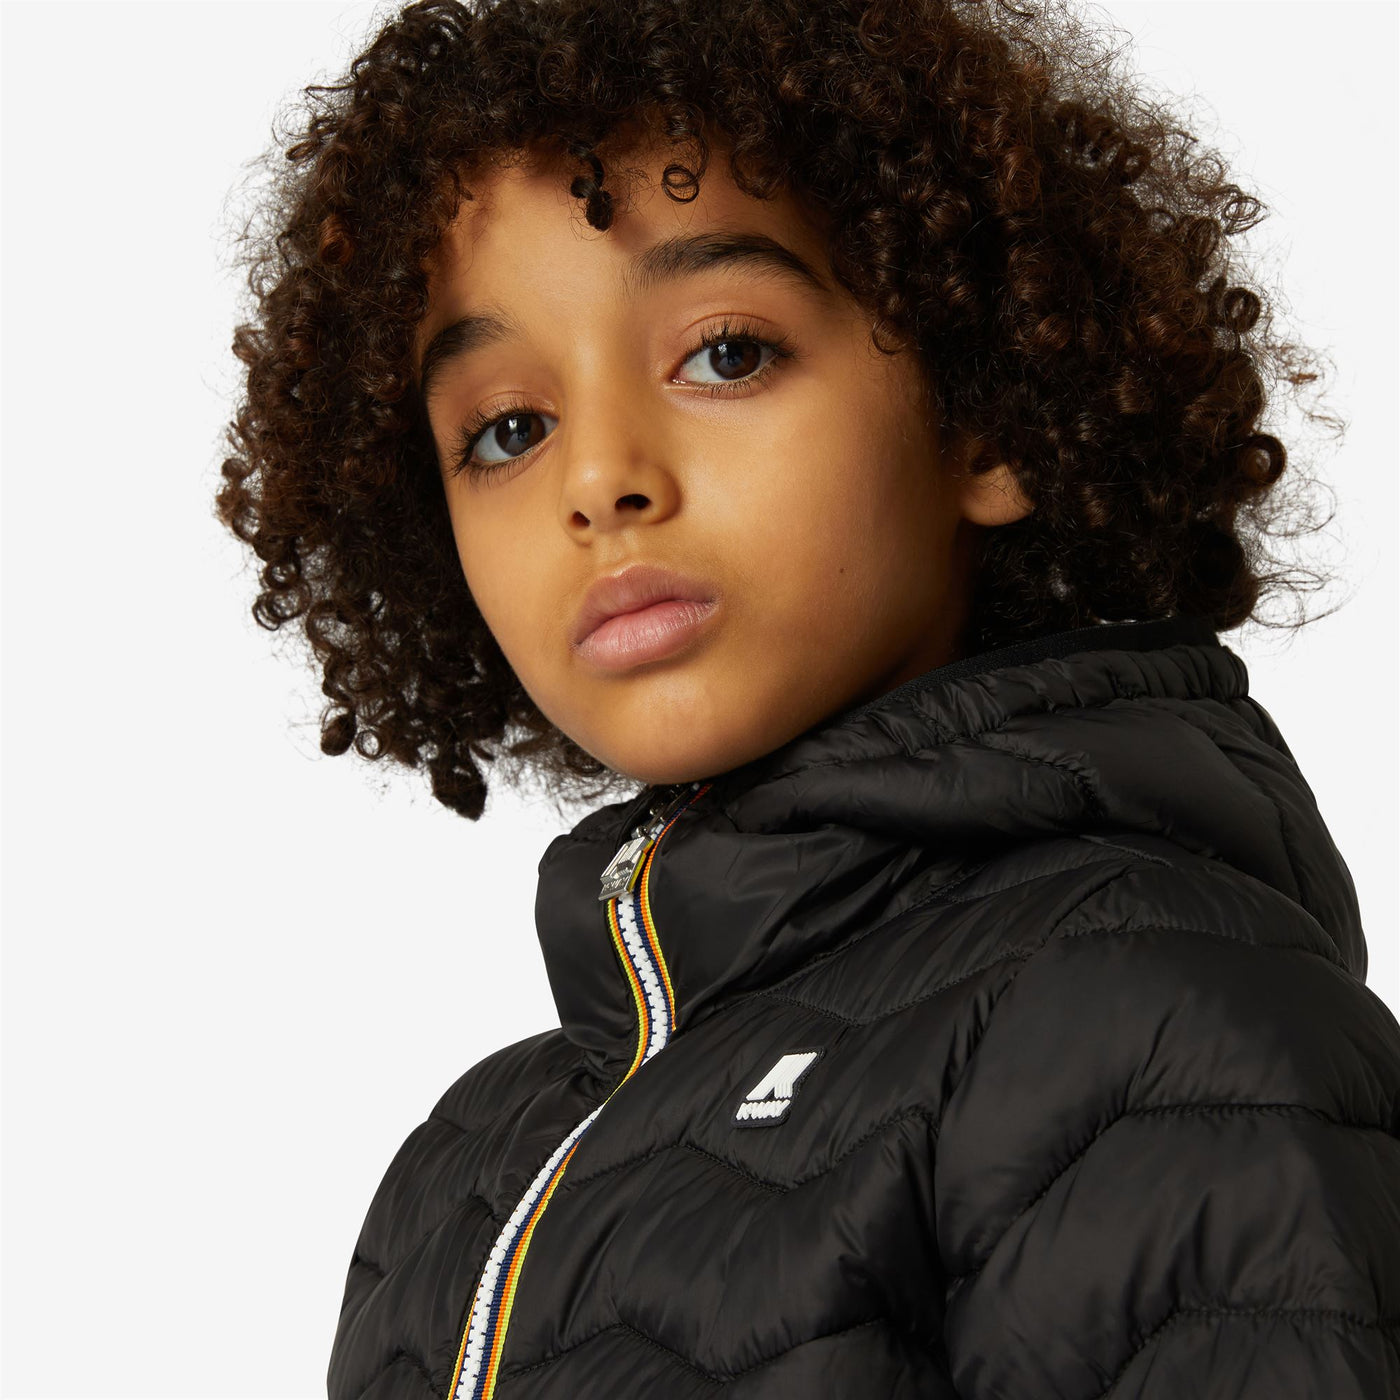 Jackets Boy P. JACK QUILTED WARM Short BLACK PURE Detail Double				